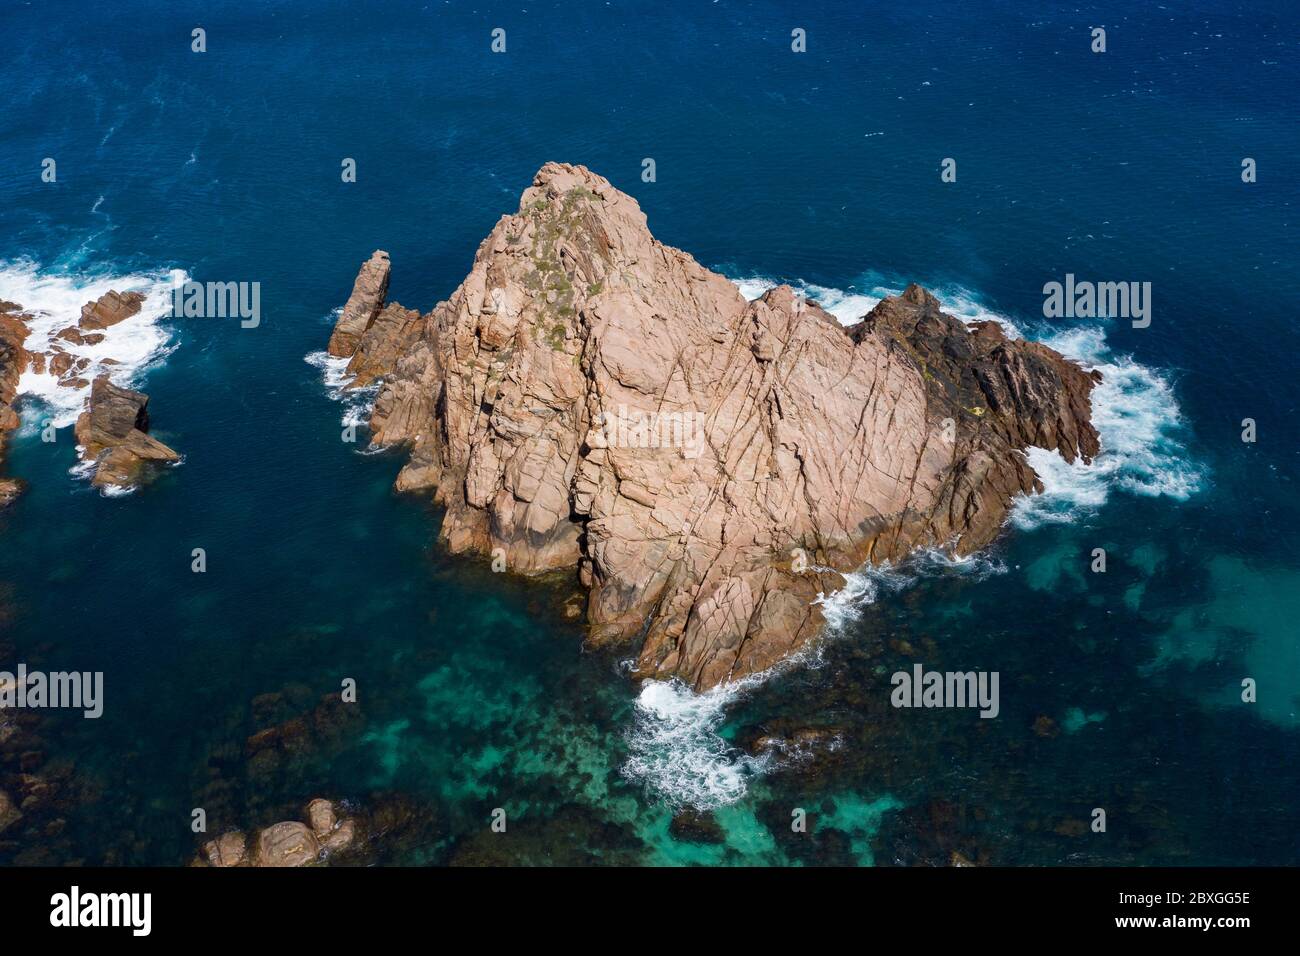 Aerial panorama of Sugarloaf Rock, which is a large, natural granite island in the Indian Ocean just off the coast approximately 2 kilometres south of Stock Photo